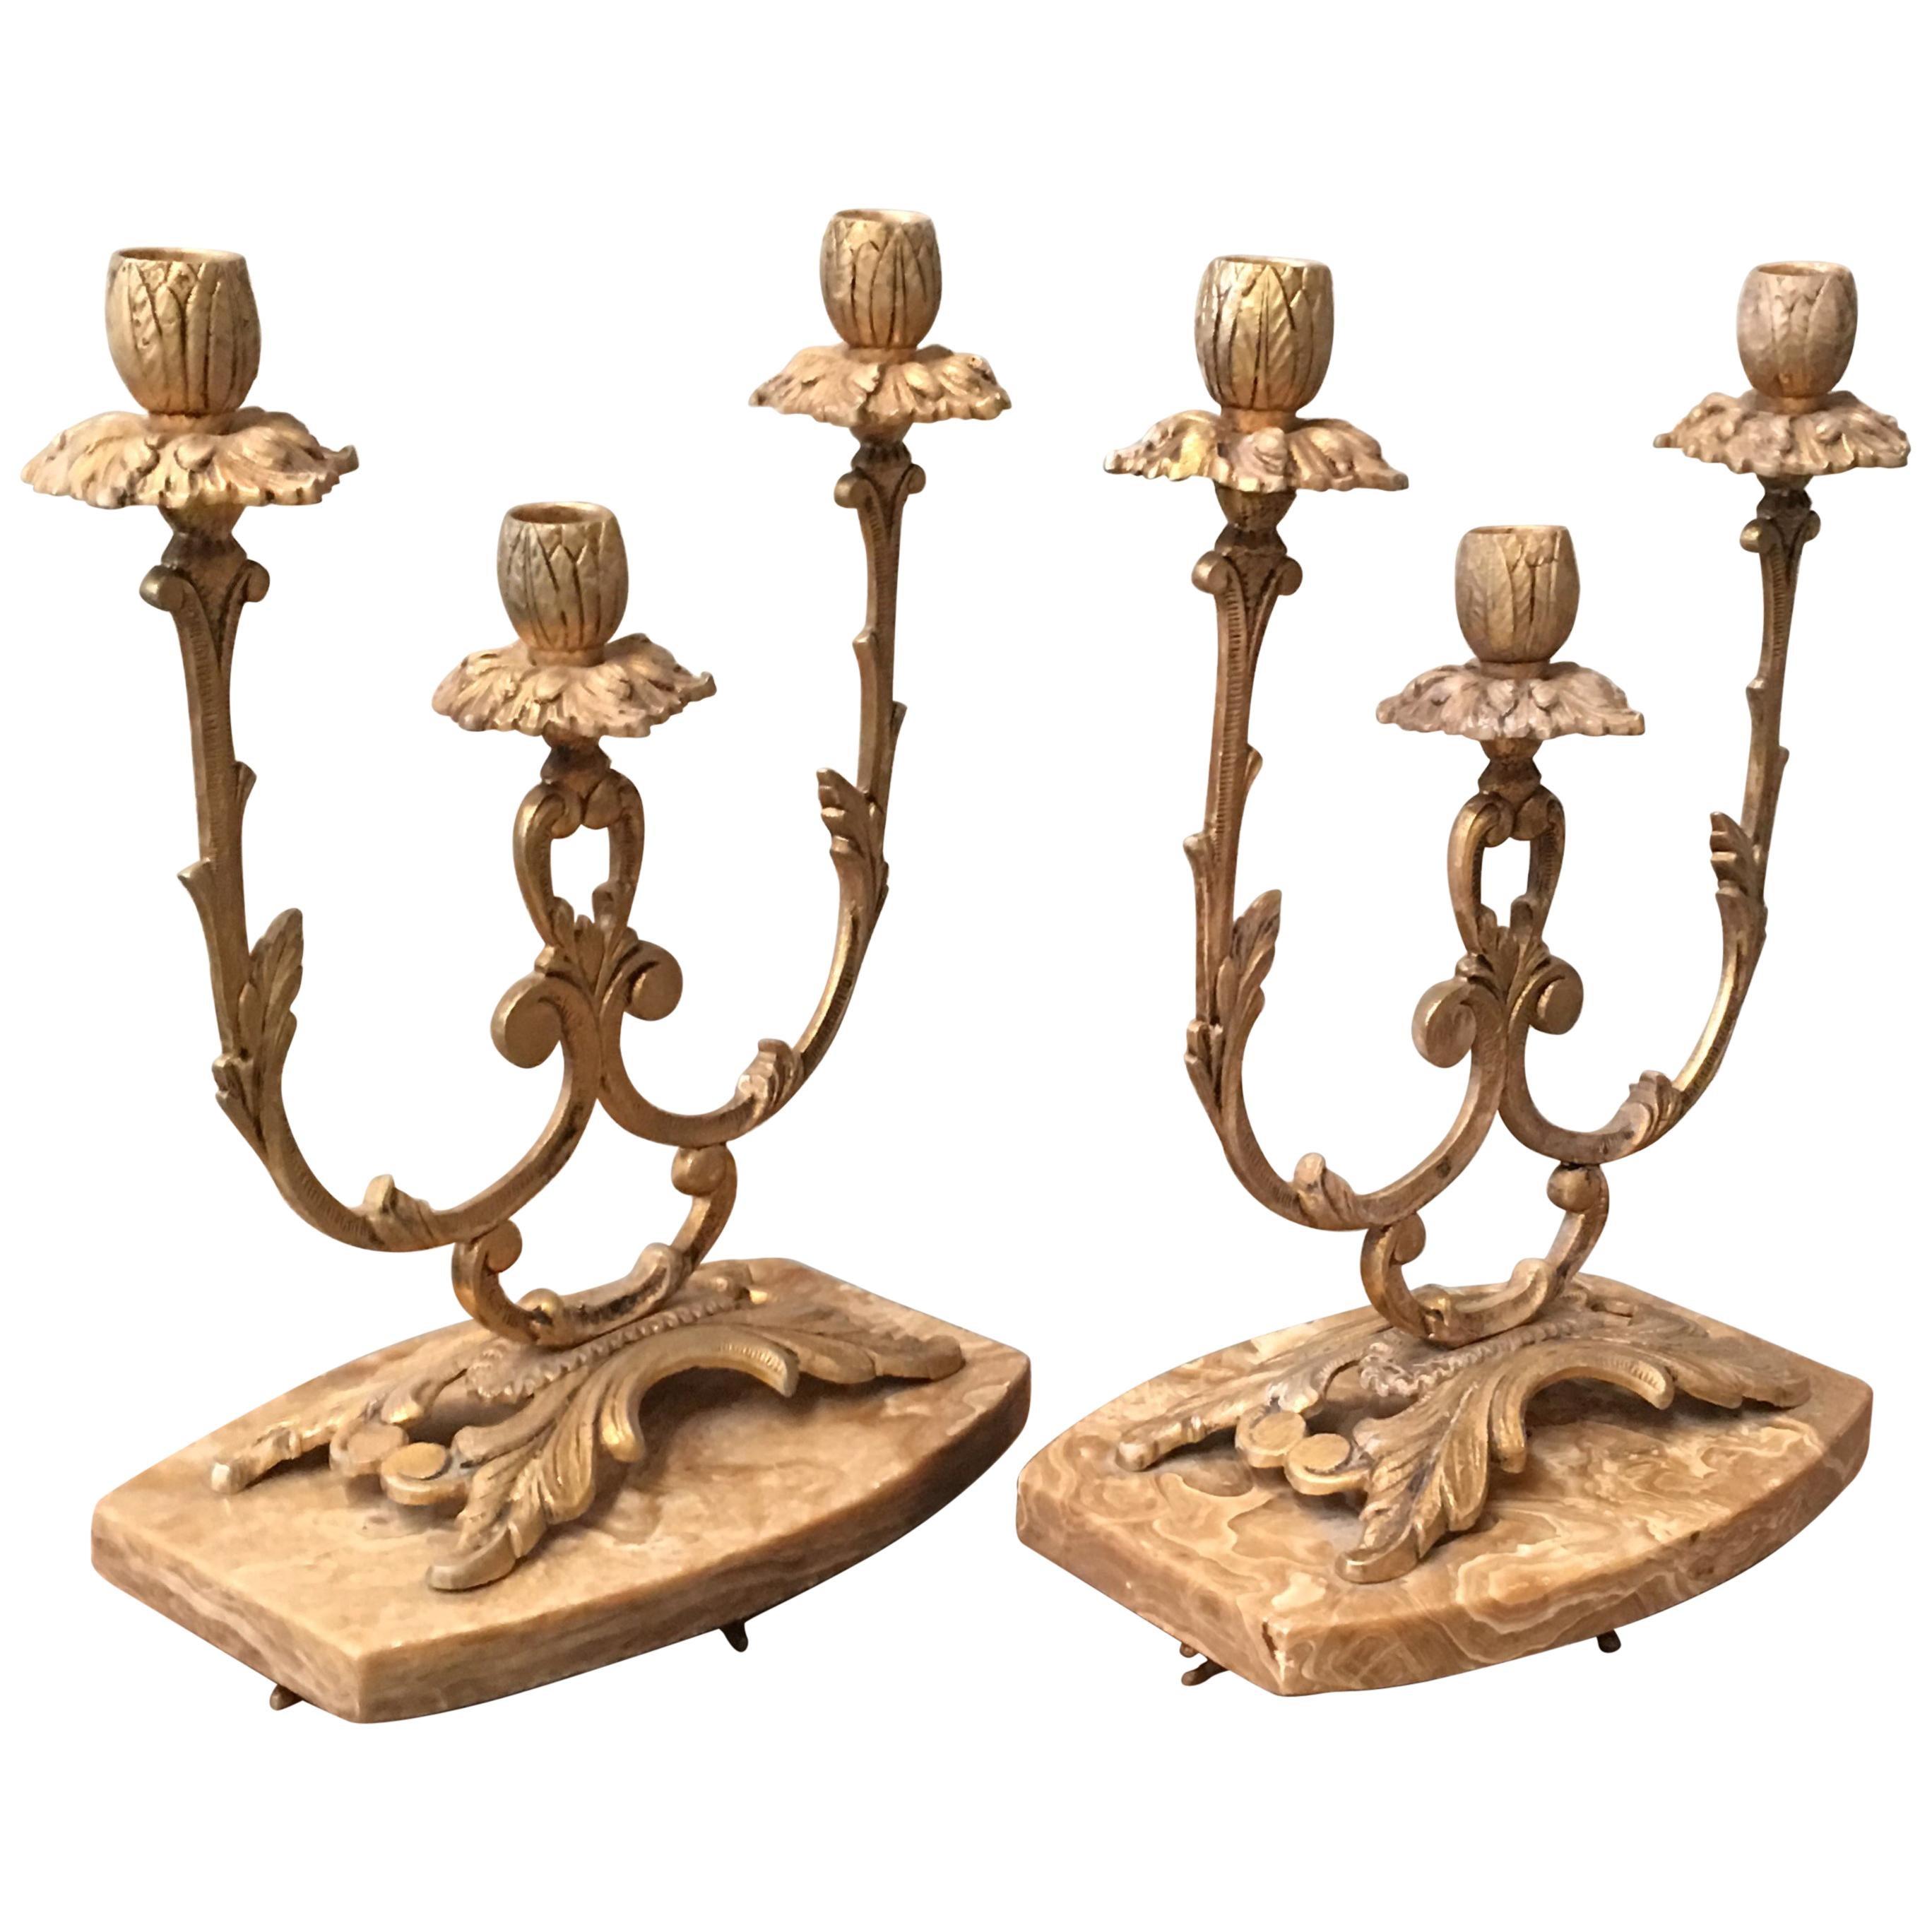 Pair of French Louis XVI Style '19th Century' Three Scroll Arm Candelabras